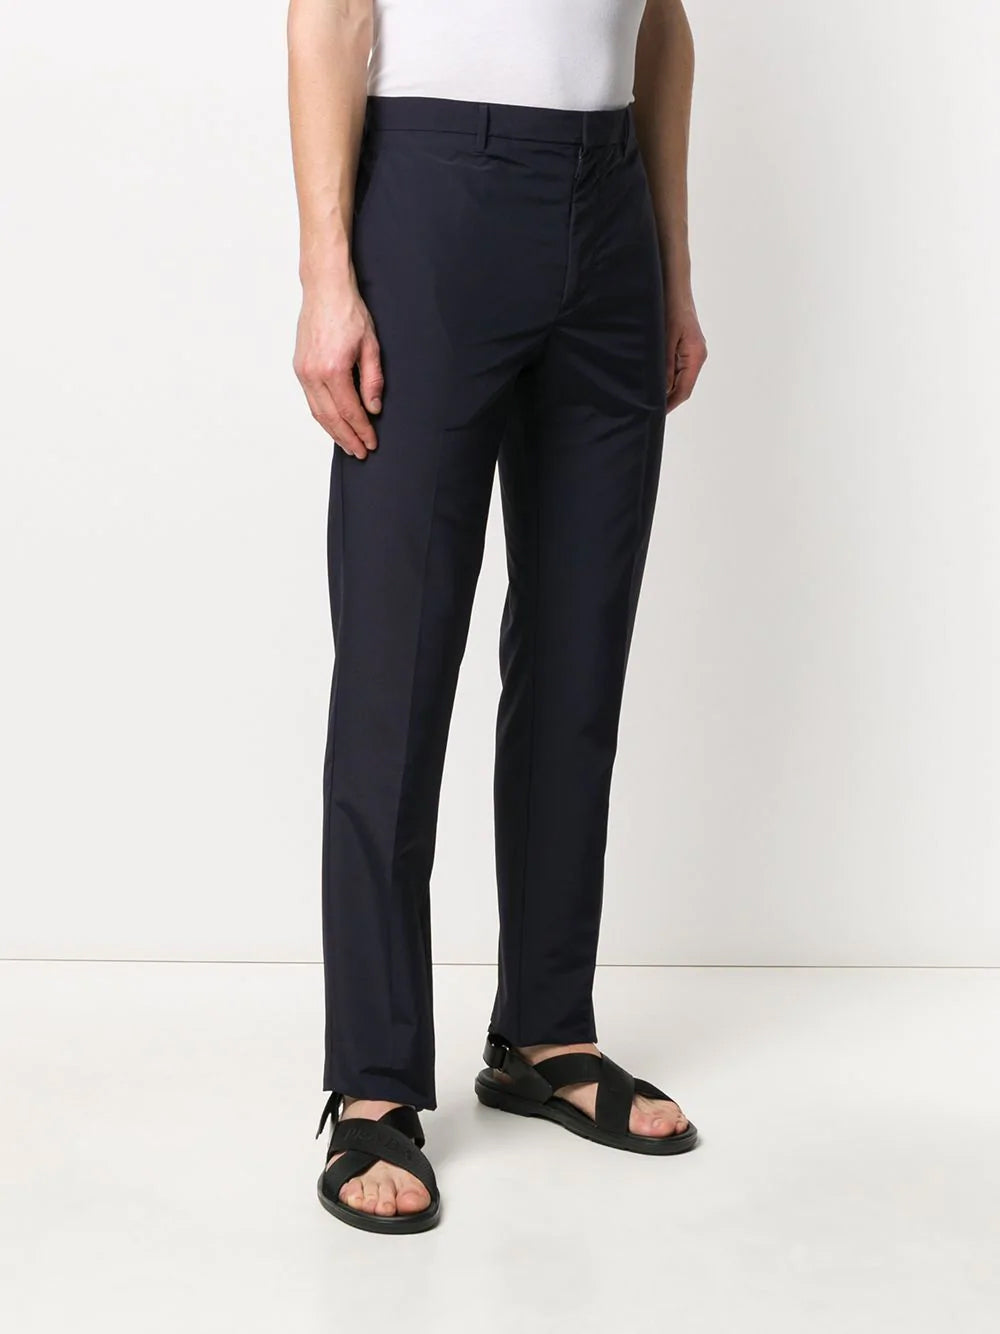 Navy blue technical wool sartorial trousers